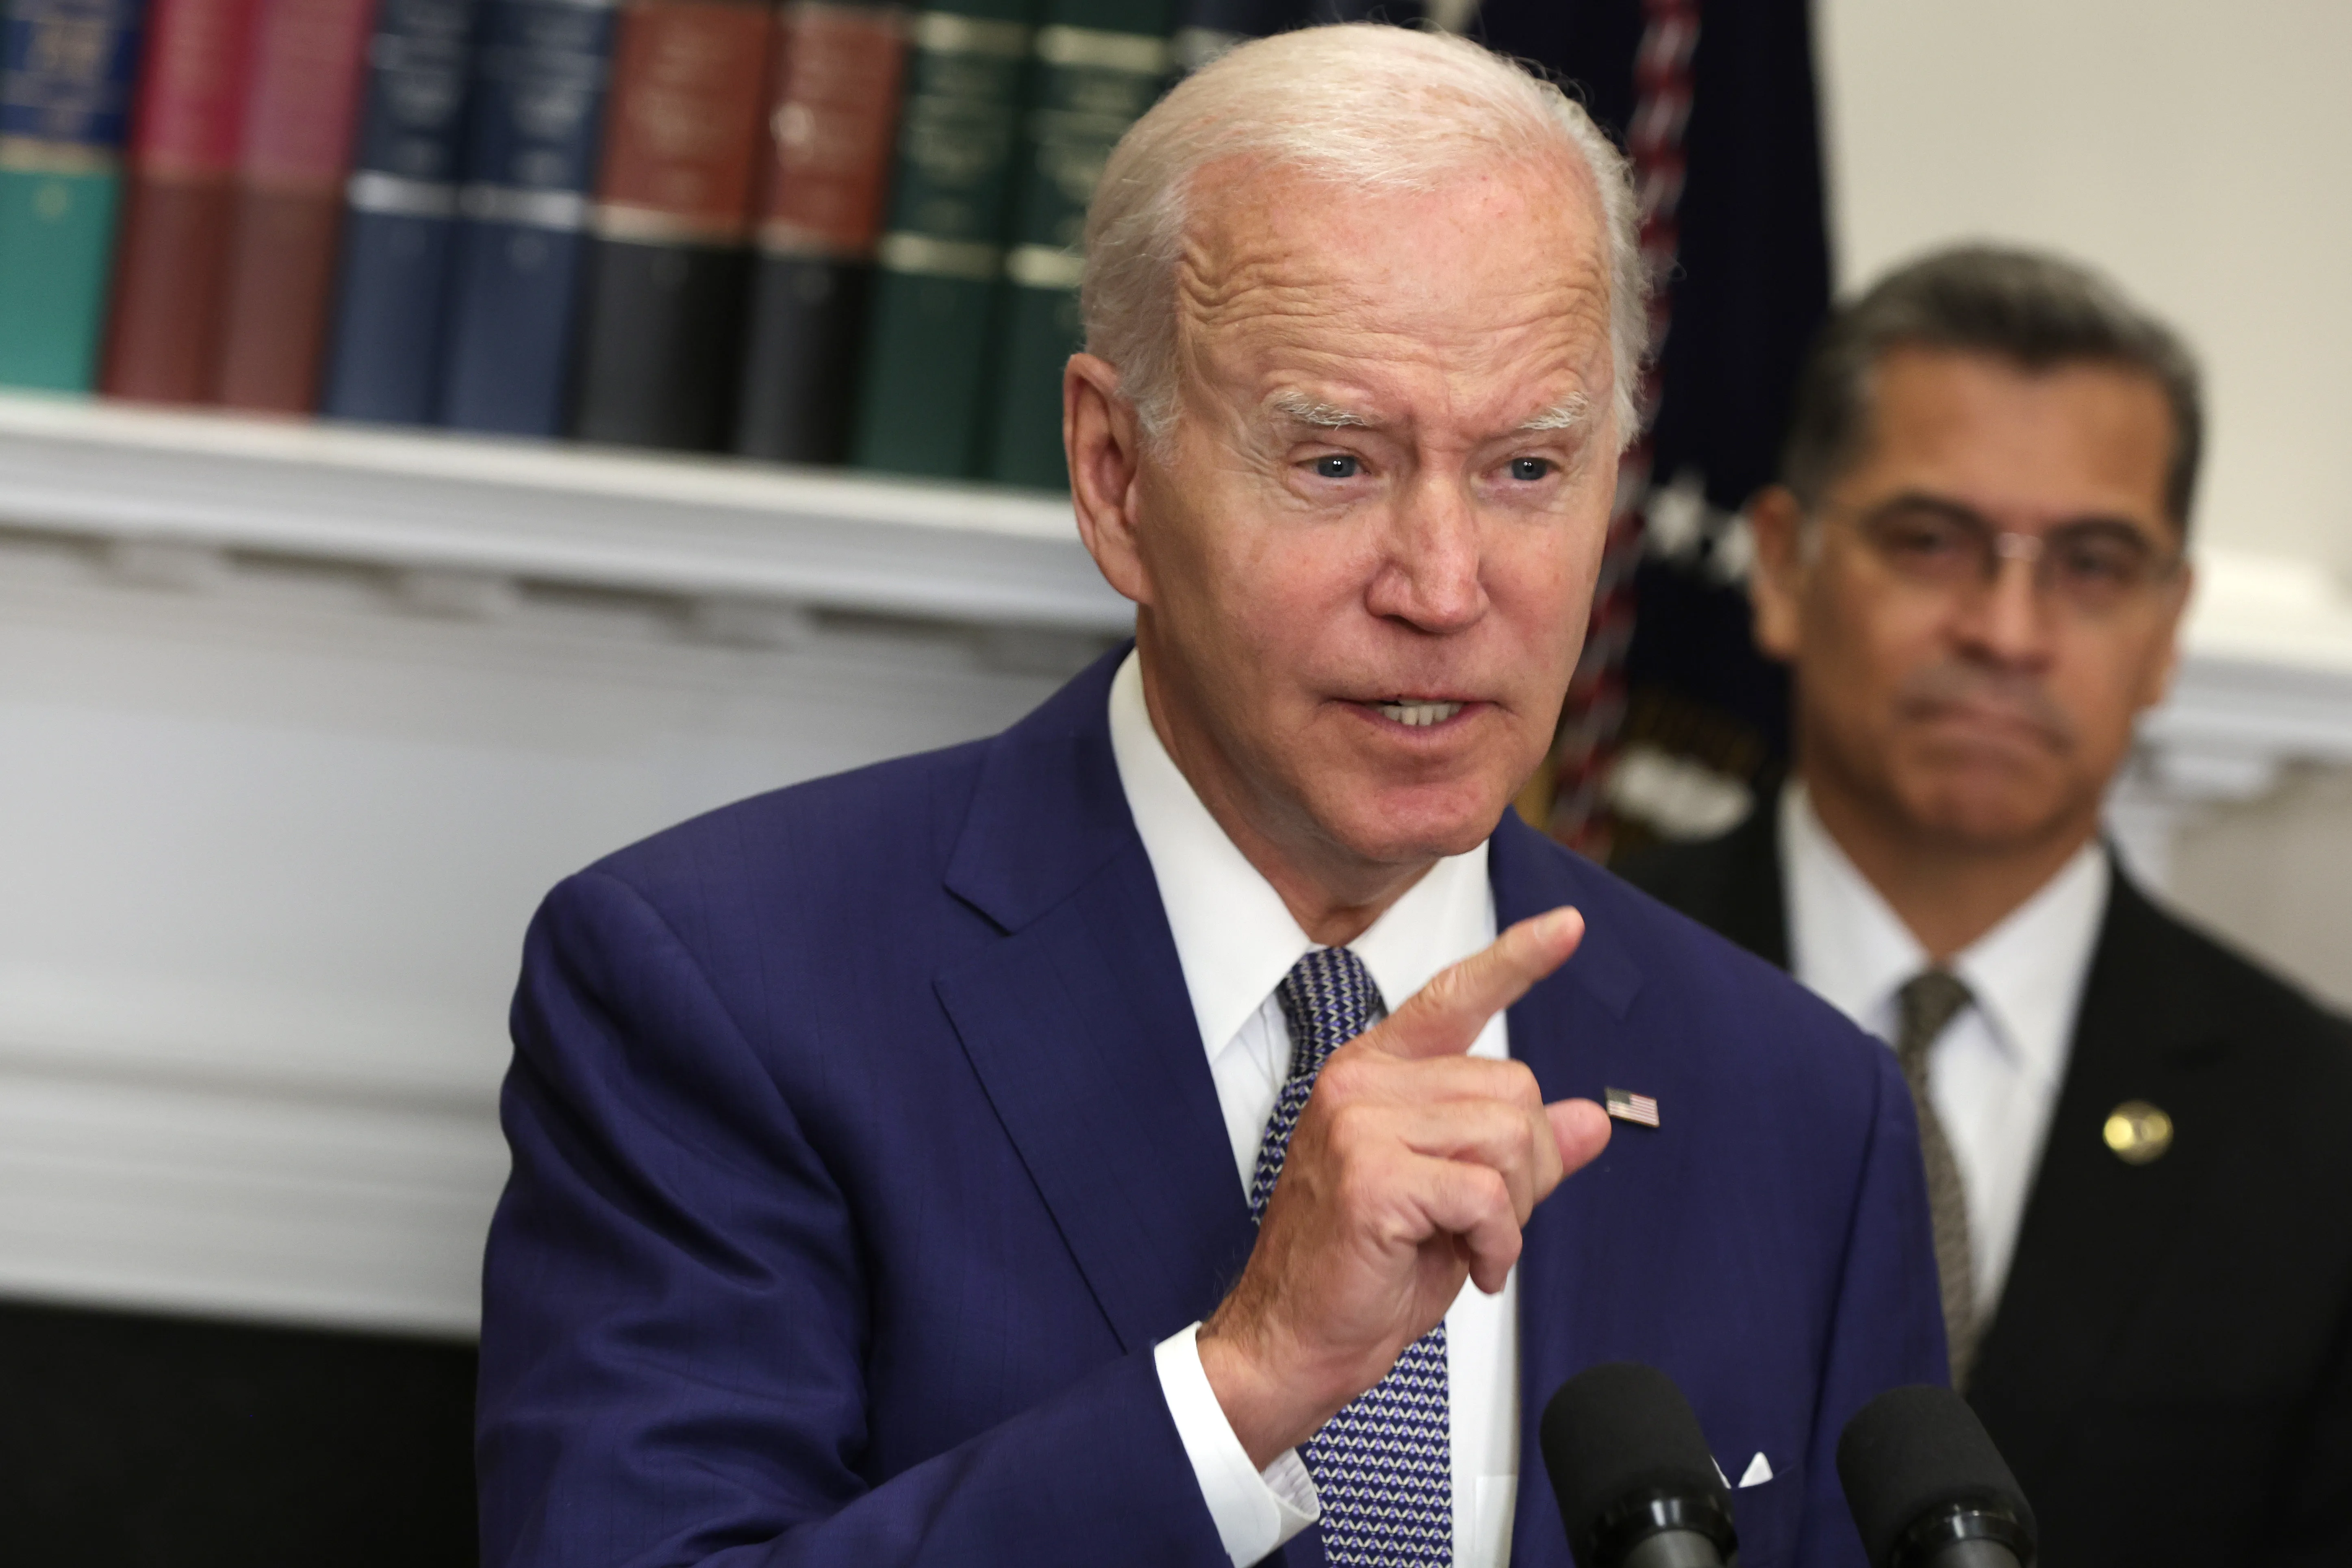 President Joe Biden delivers remarks on reproductive rights as Secretary of Health and Human Services Xavier Becerra listens during an event at the Roosevelt Room of the White House on July 8, 2022 in Washington, D.C.?w=200&h=150